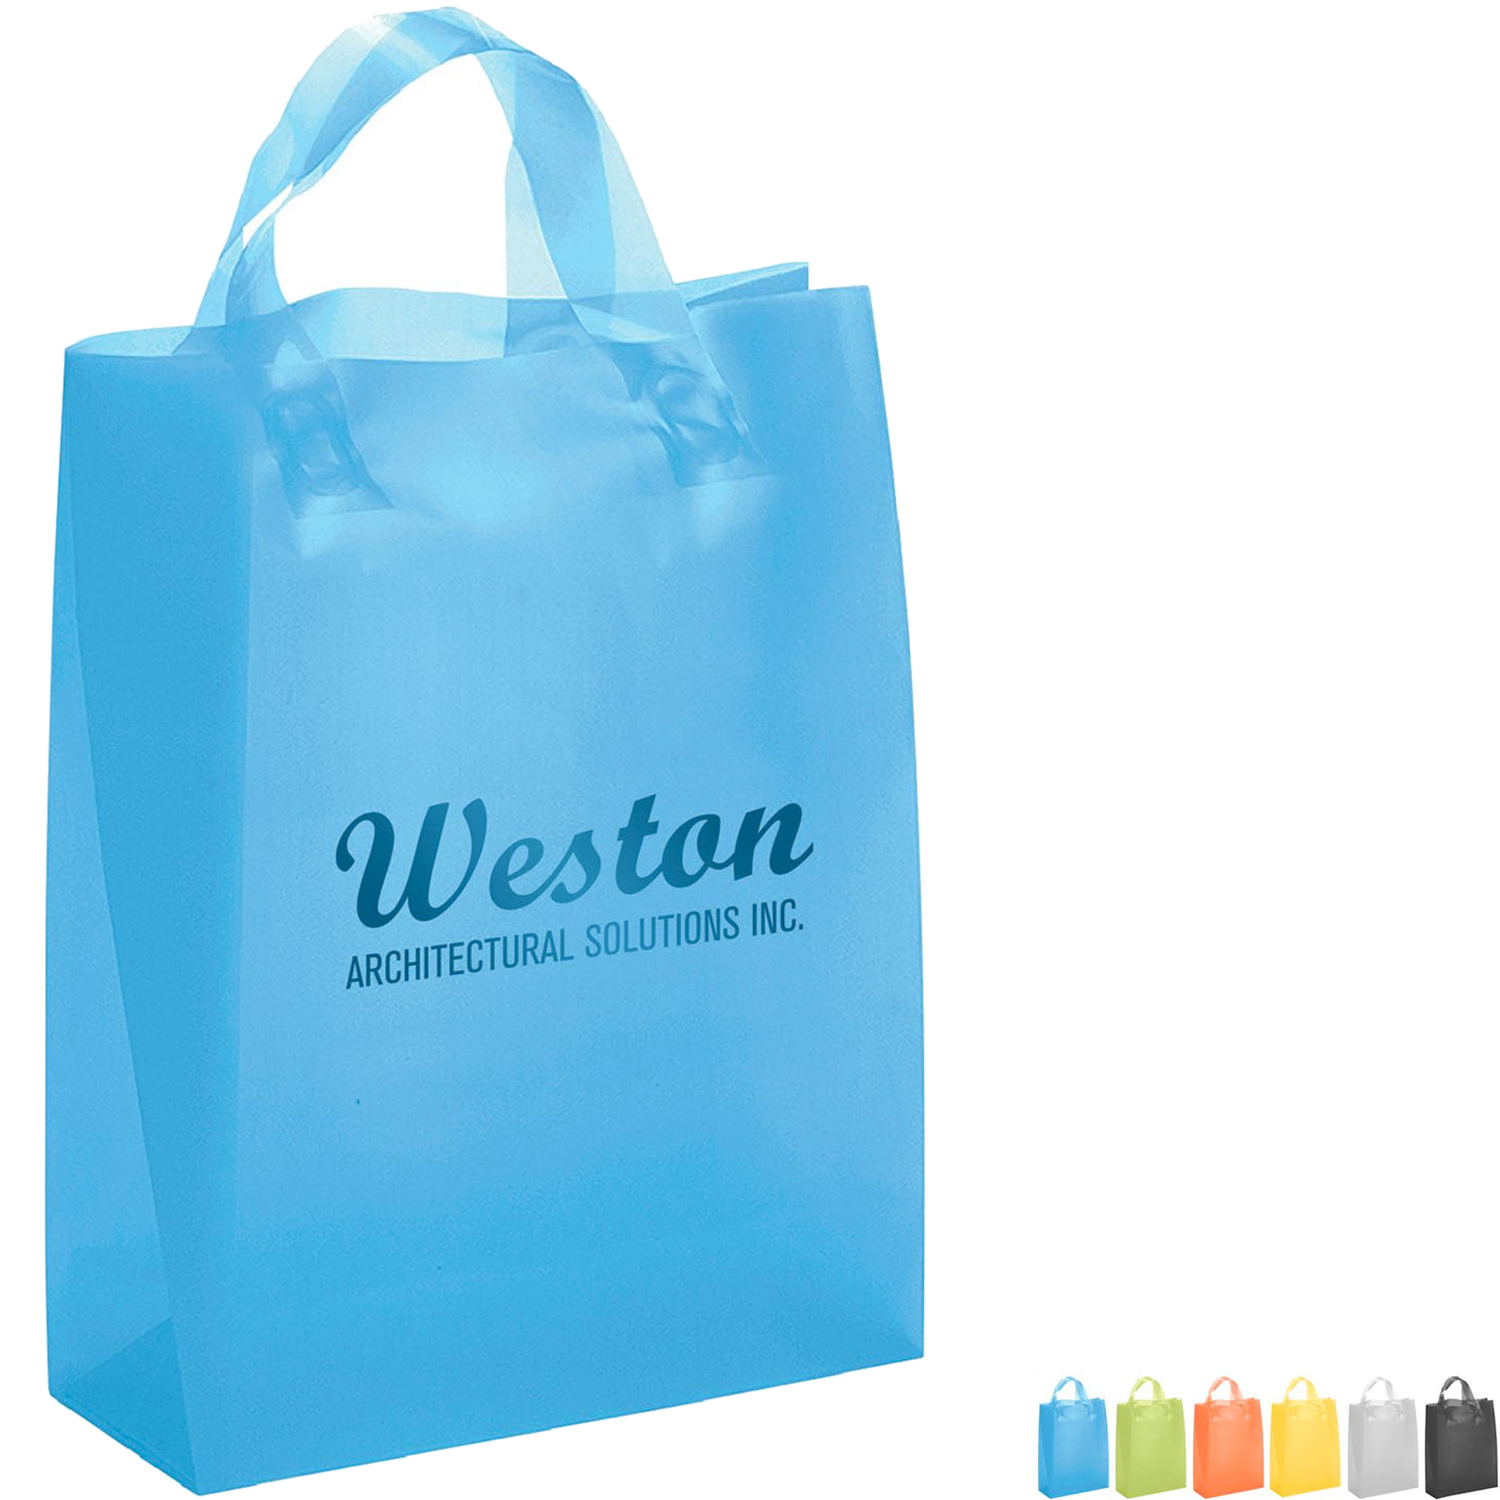 12 x 12 x 6 Clear Plastic Bag - Soft Loop Handle - Promotional Giveaway